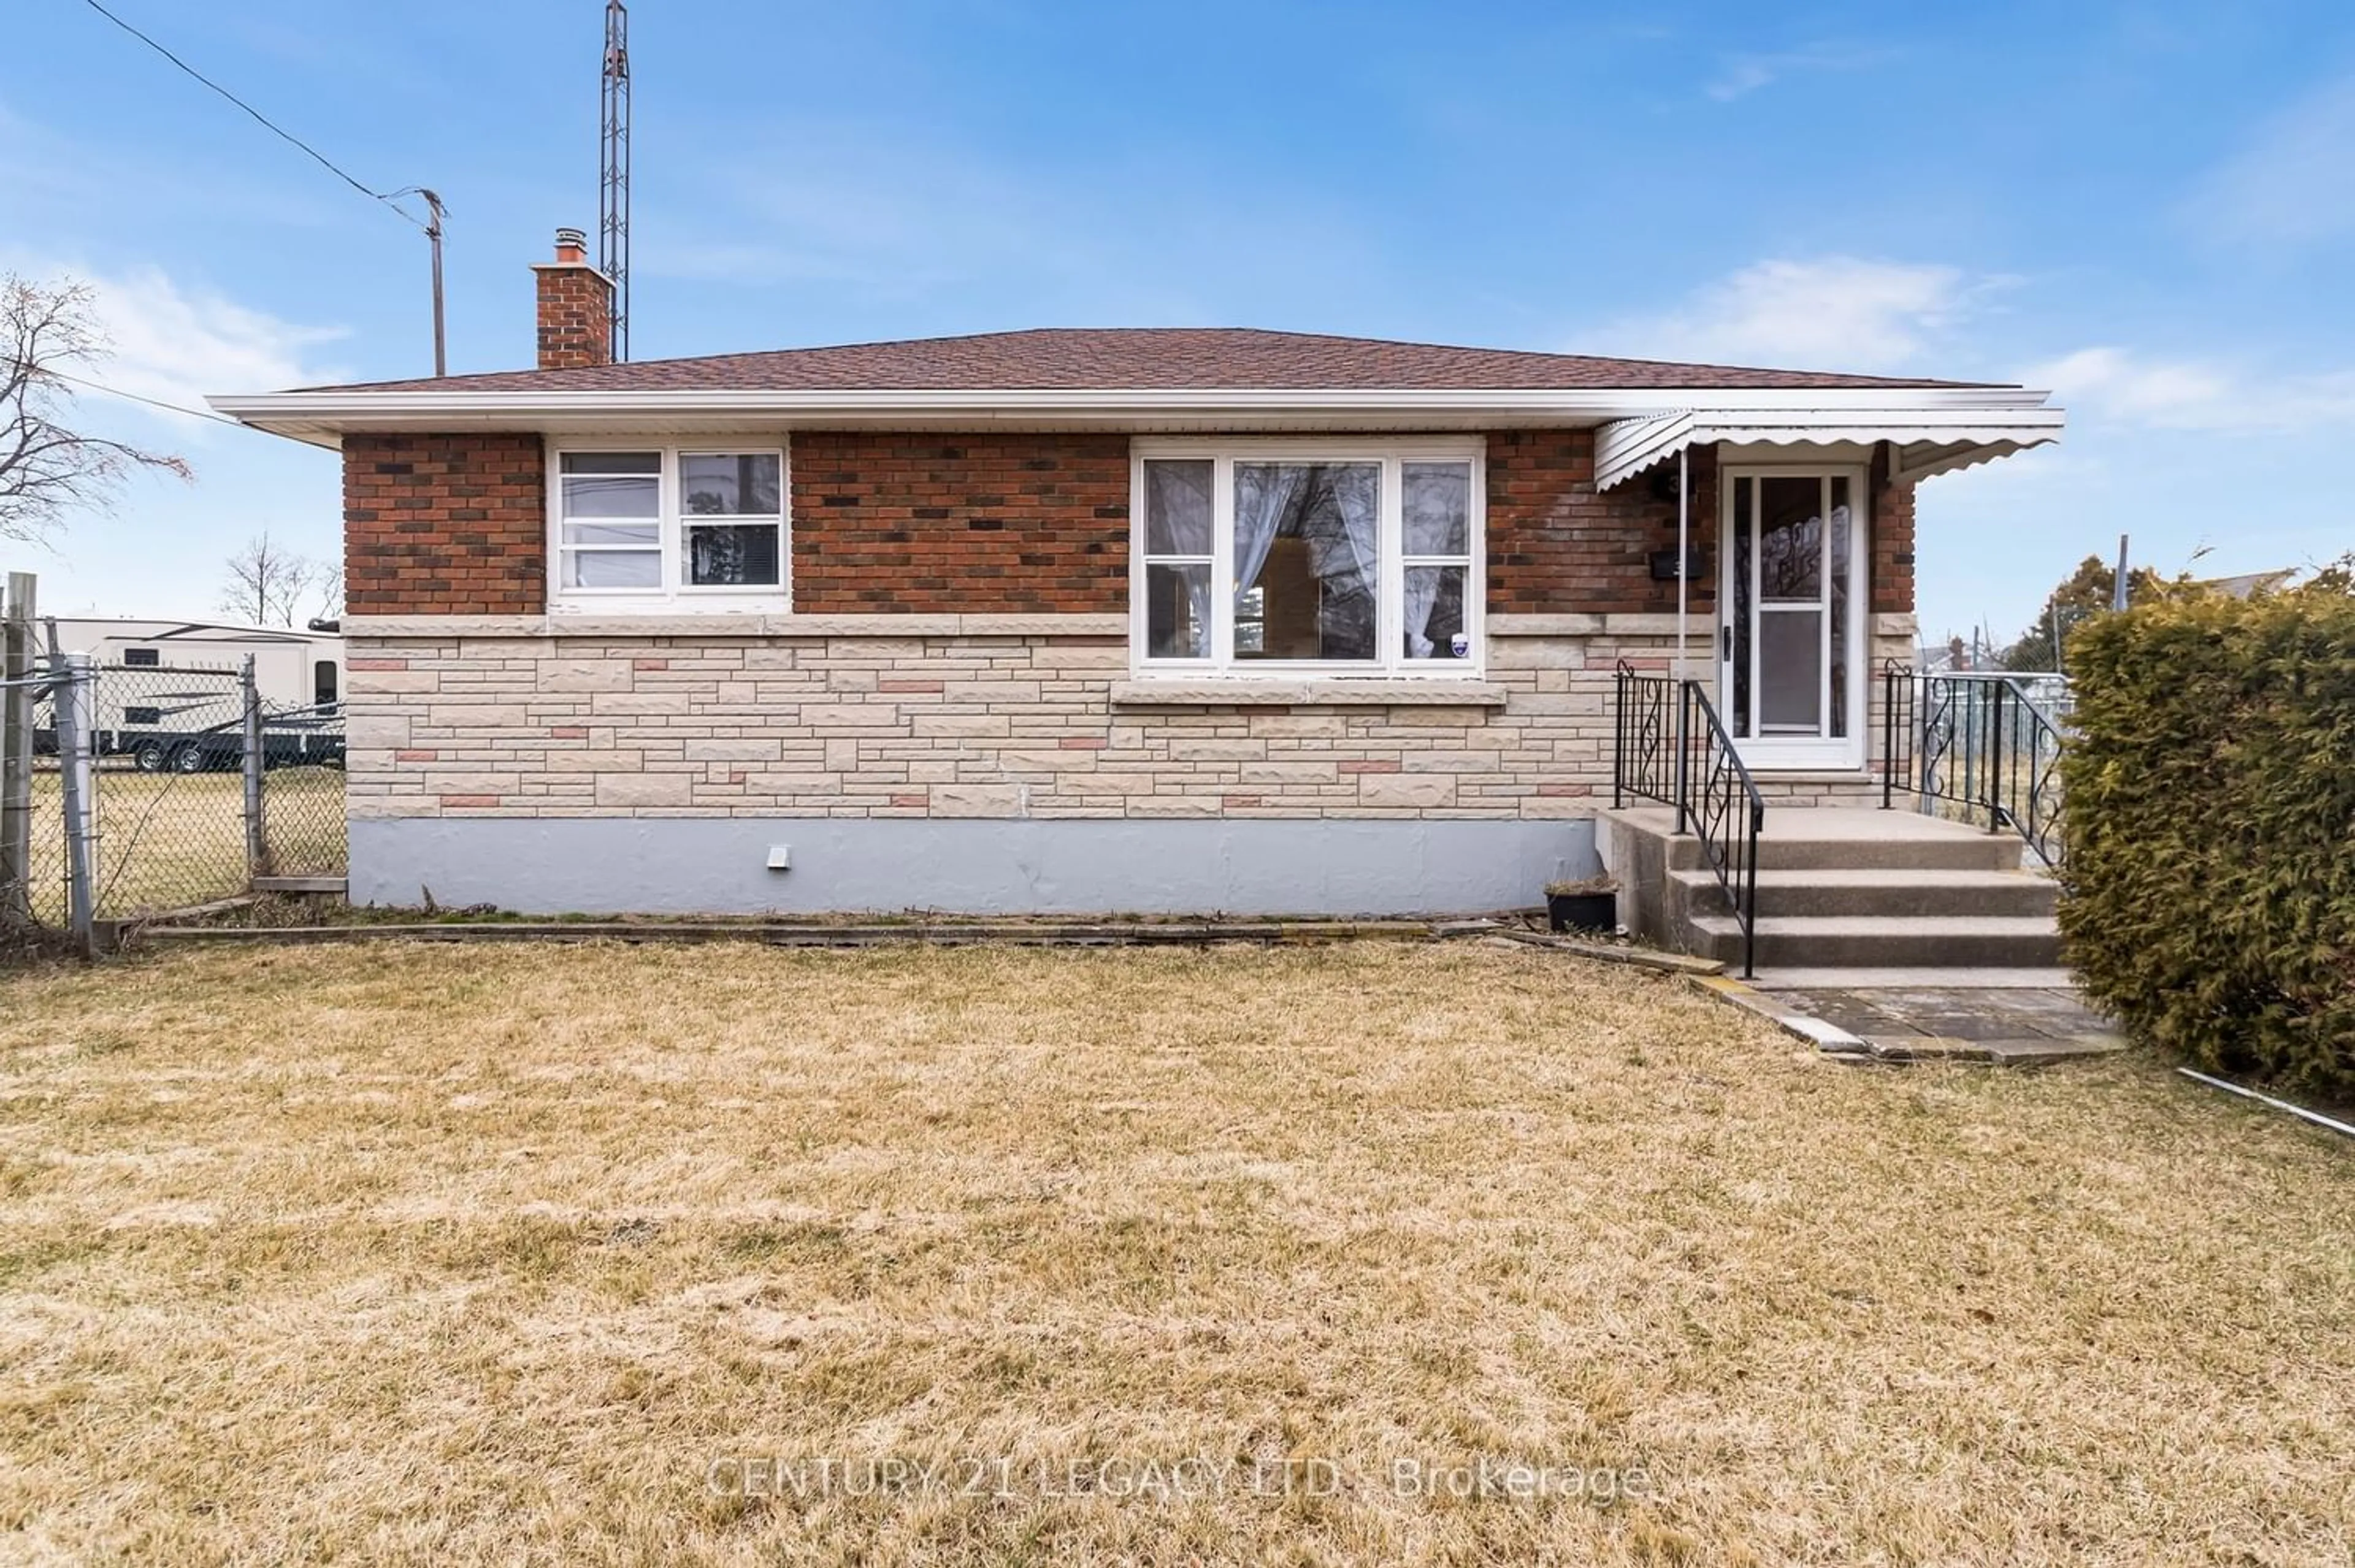 Home with brick exterior material for 3 Lincoln Ave, St. Catharines Ontario L2P 2J1